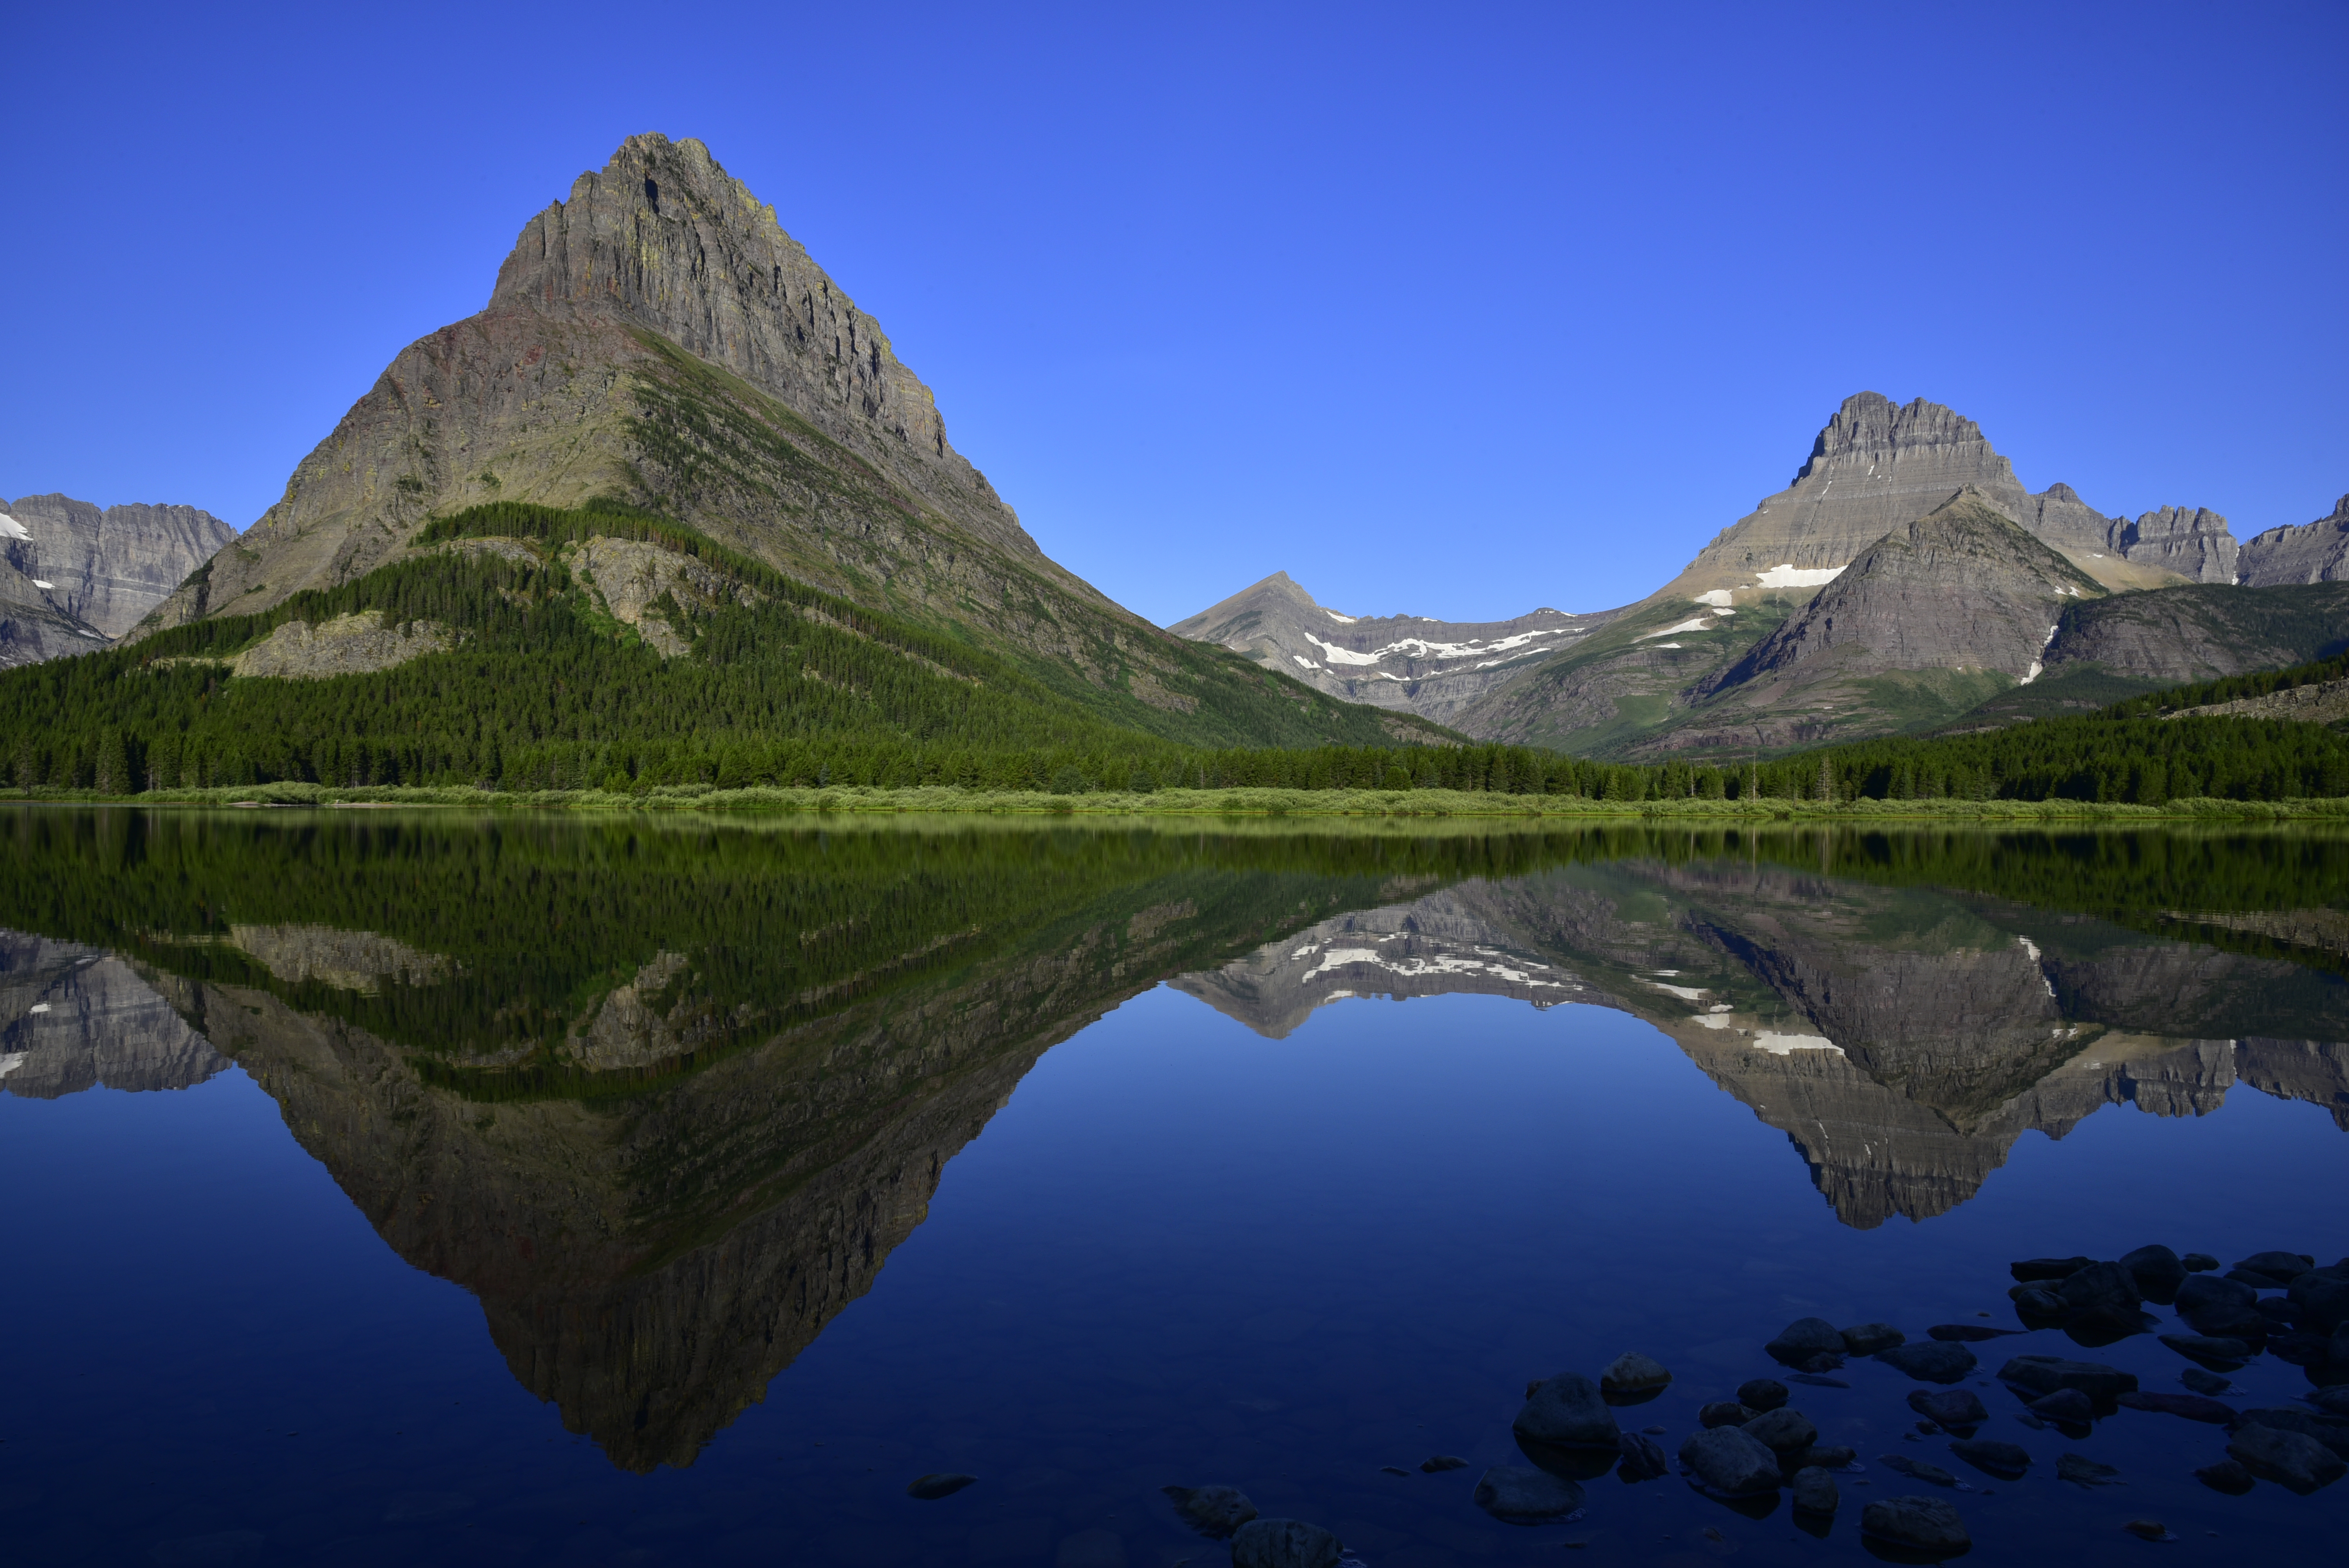 Early morning light, Swiftcurrent Lake, (left to right) Grinnell Point, Swiftcurrent Mountain, Mt. Wilbur  -  Glacier National Park, Montana